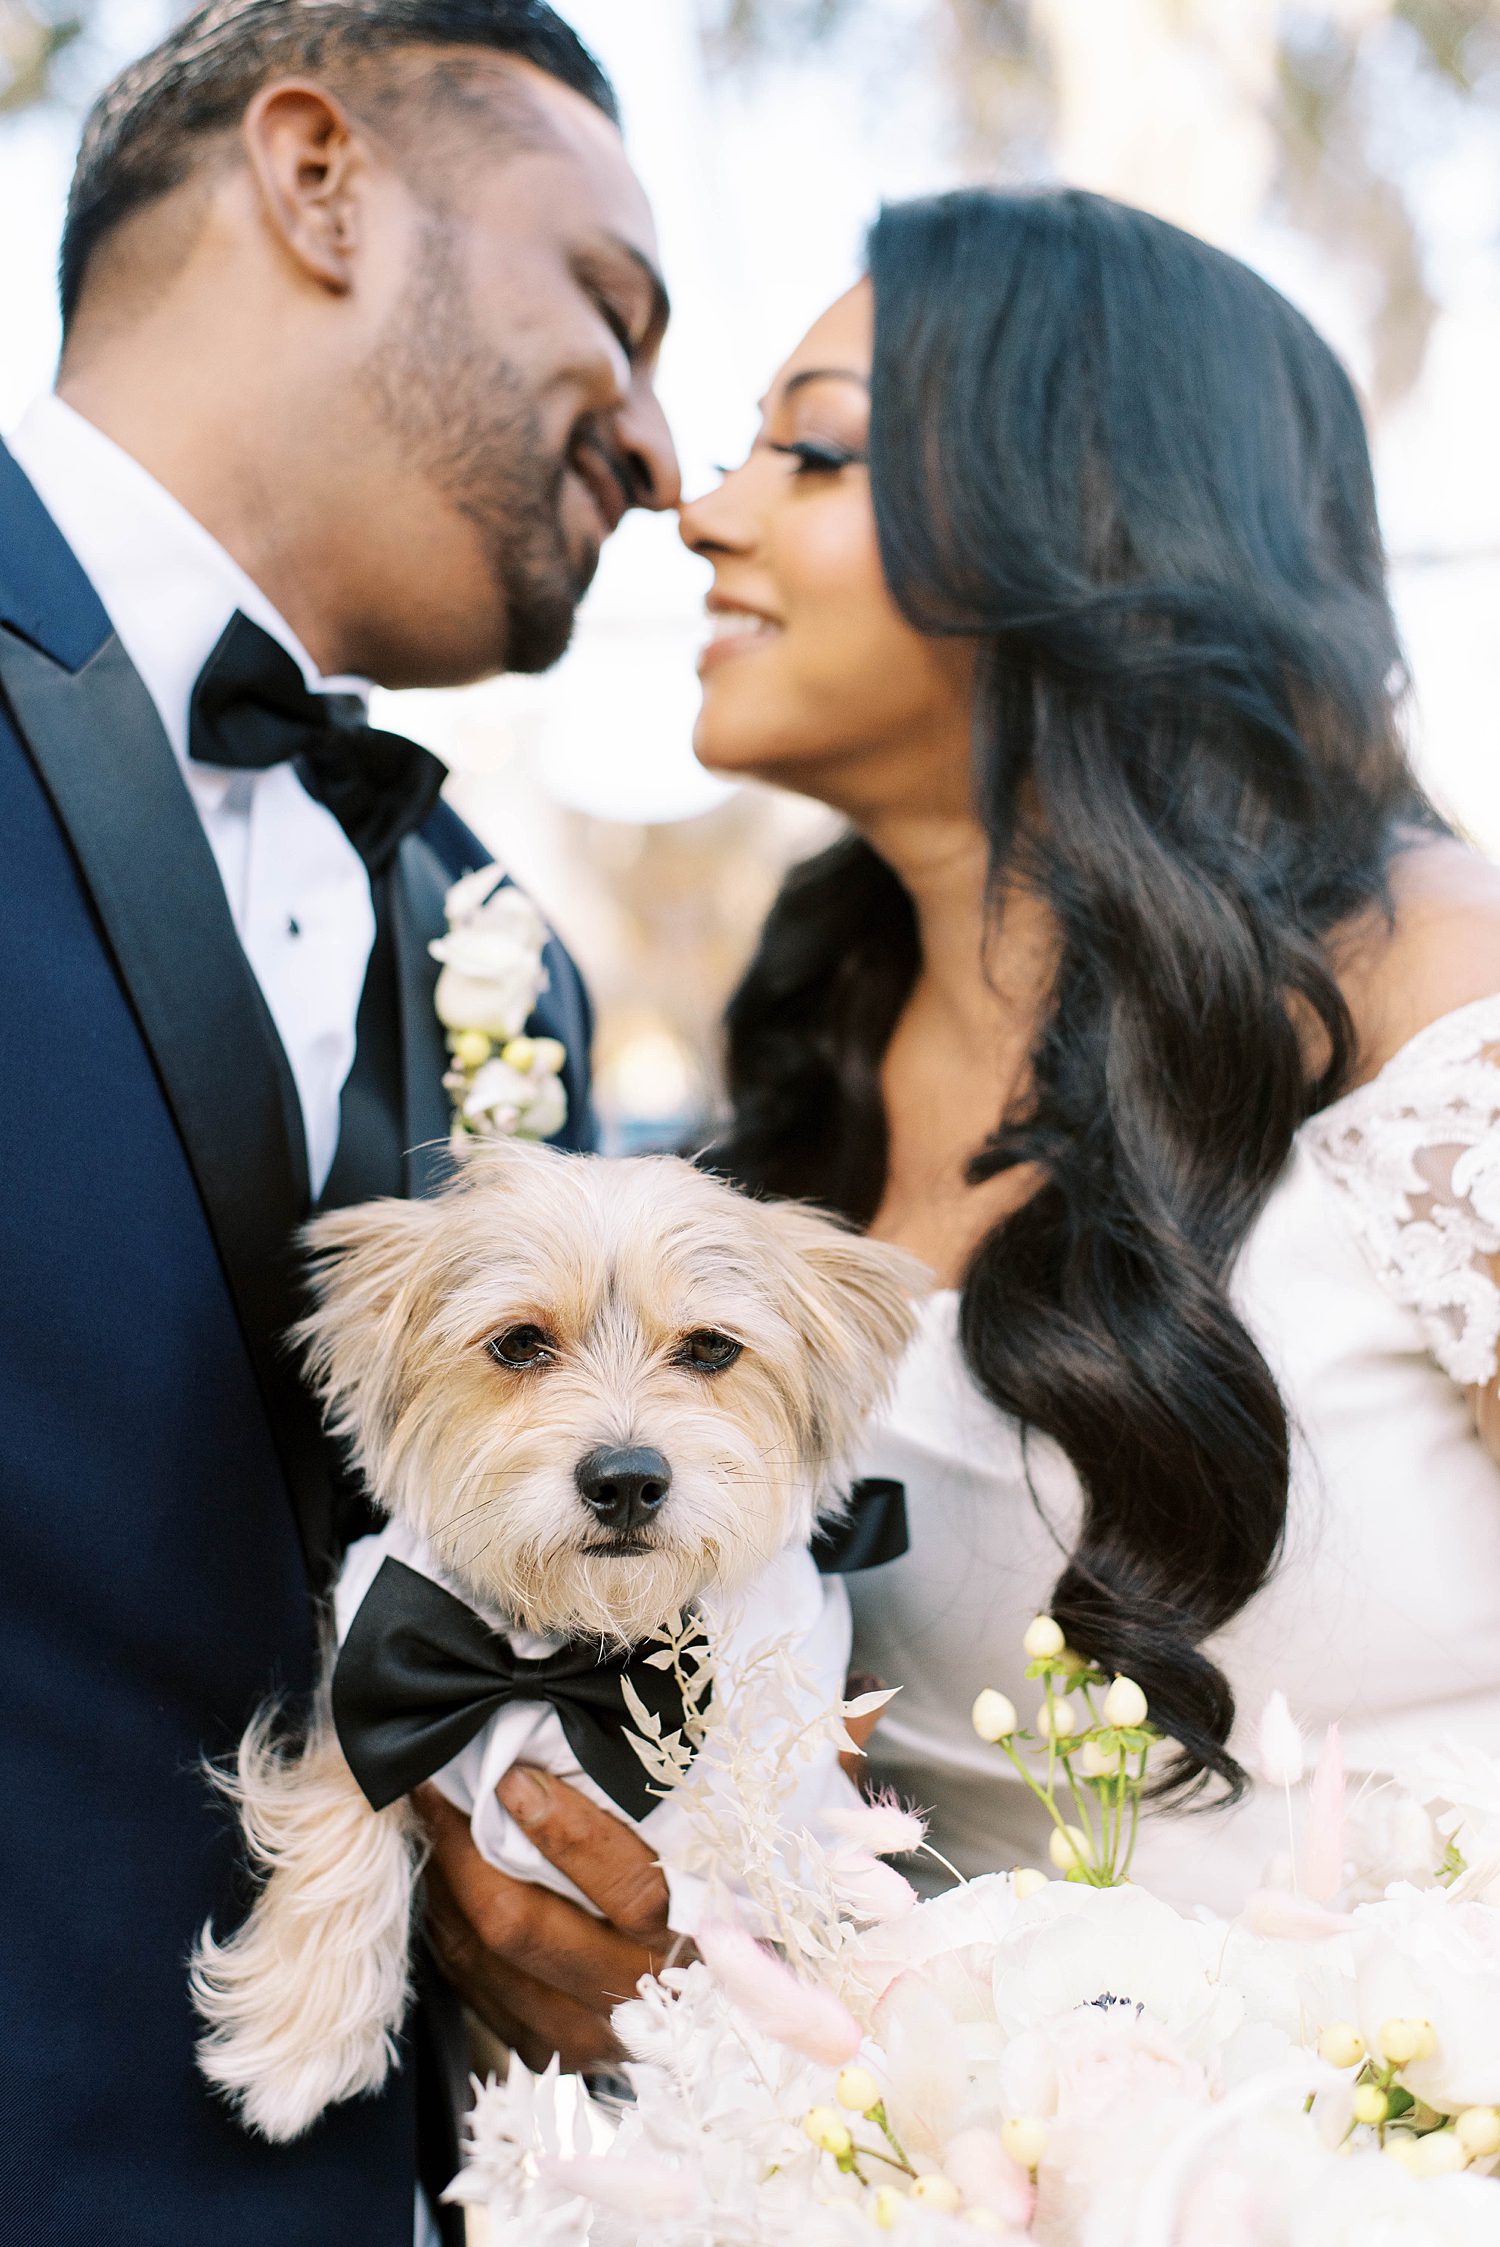 husband and wife lean to kiss while holding dog in a tux